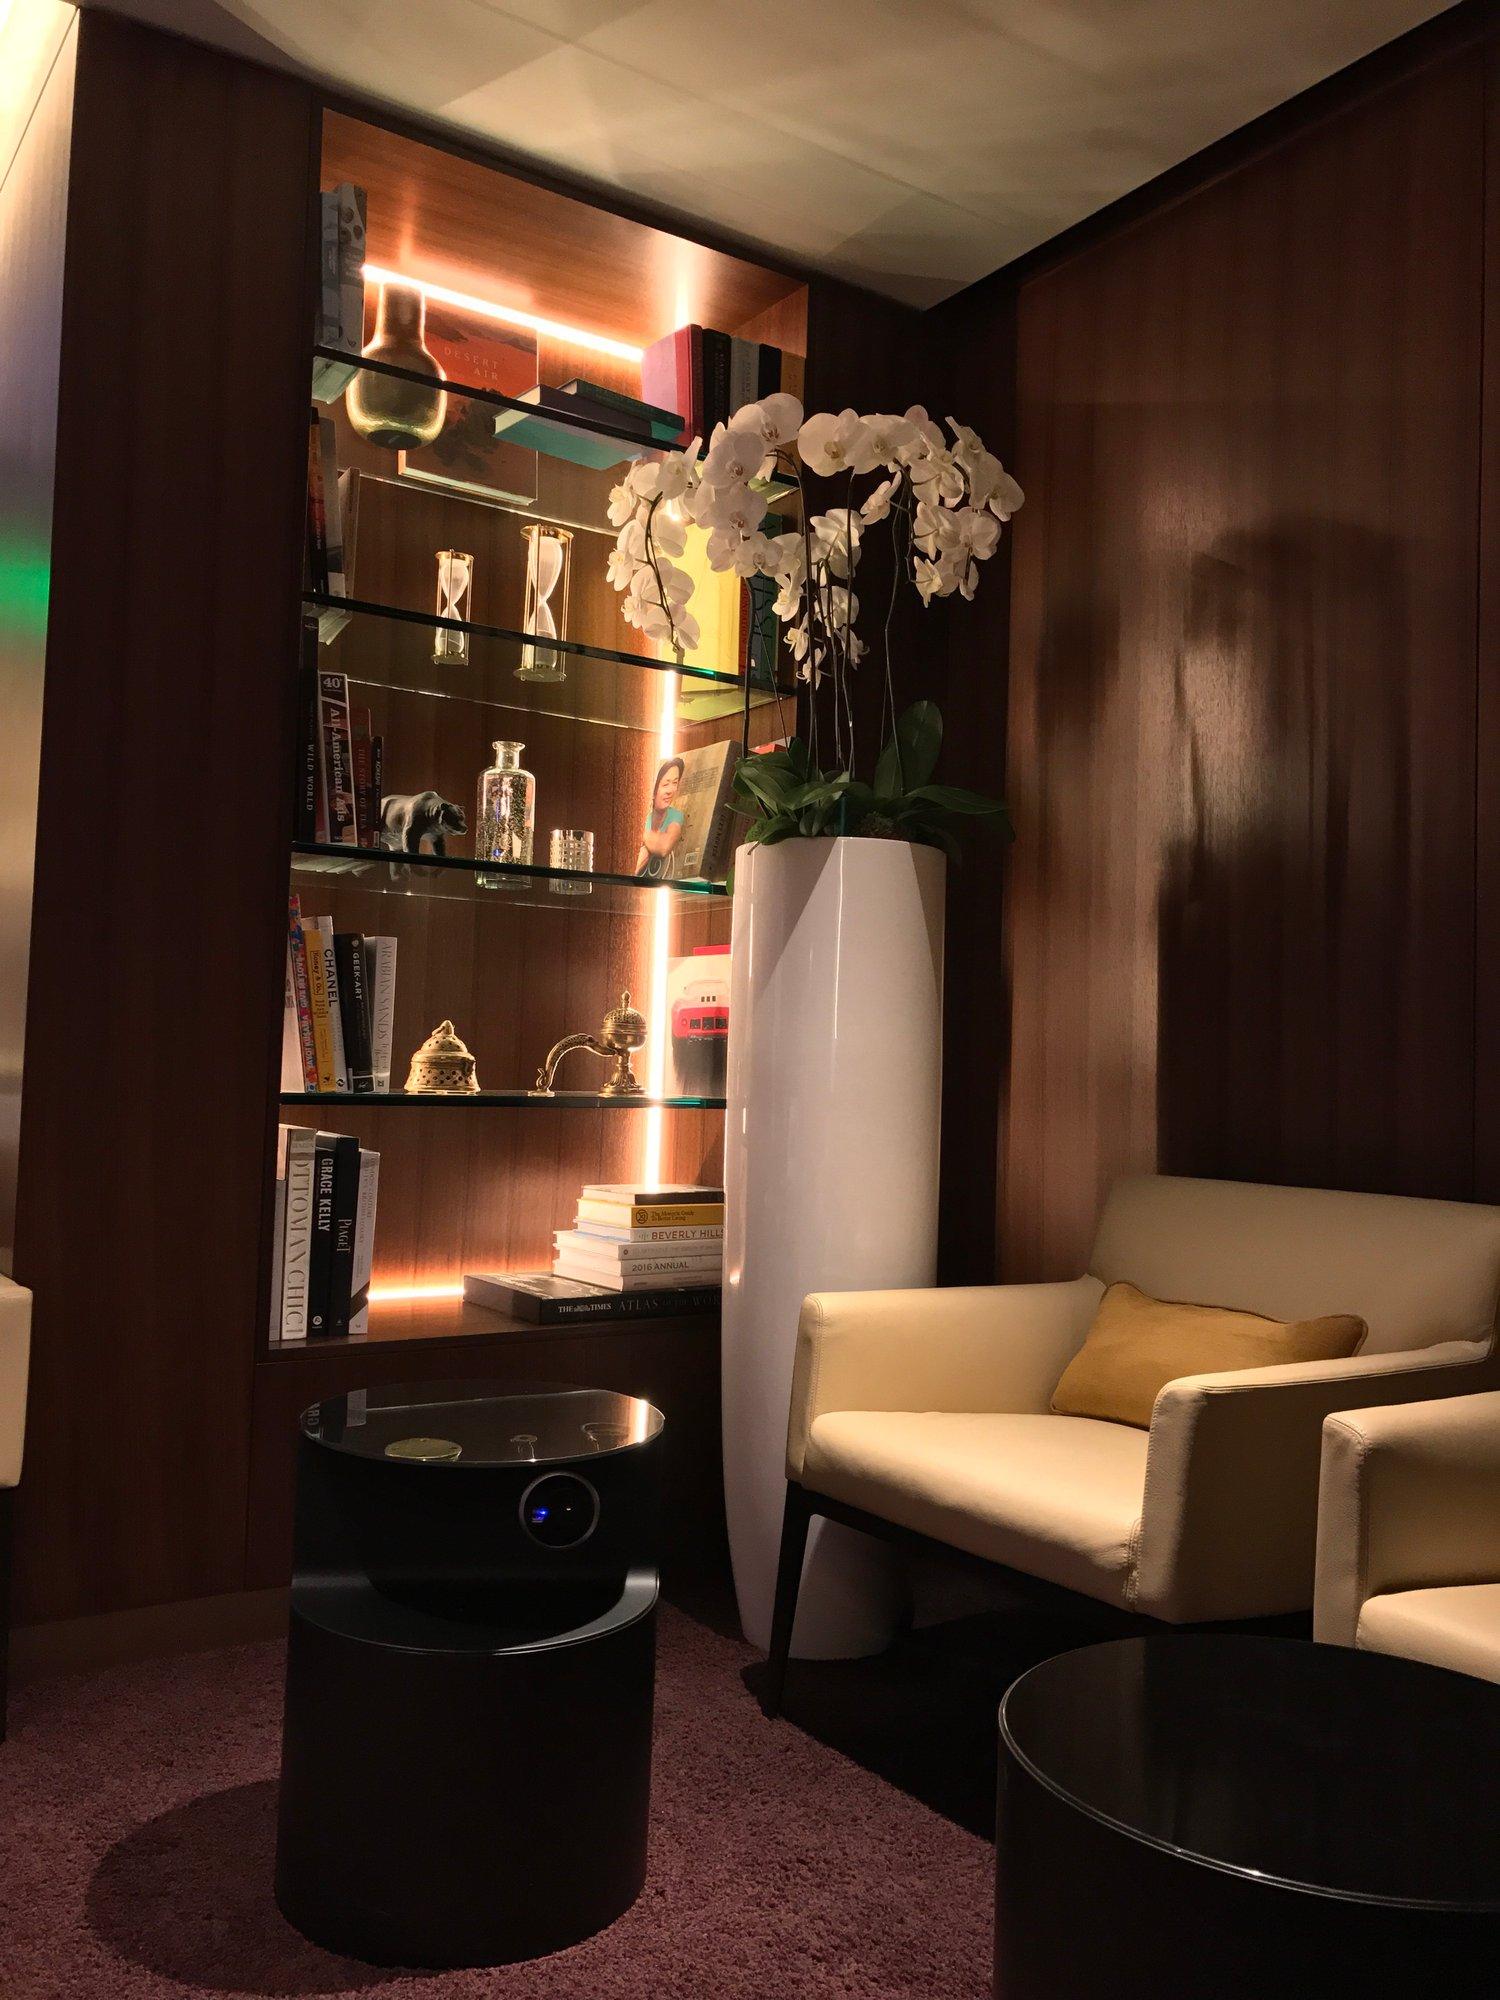 Etihad Airways First & Business Class Lounge image 2 of 5